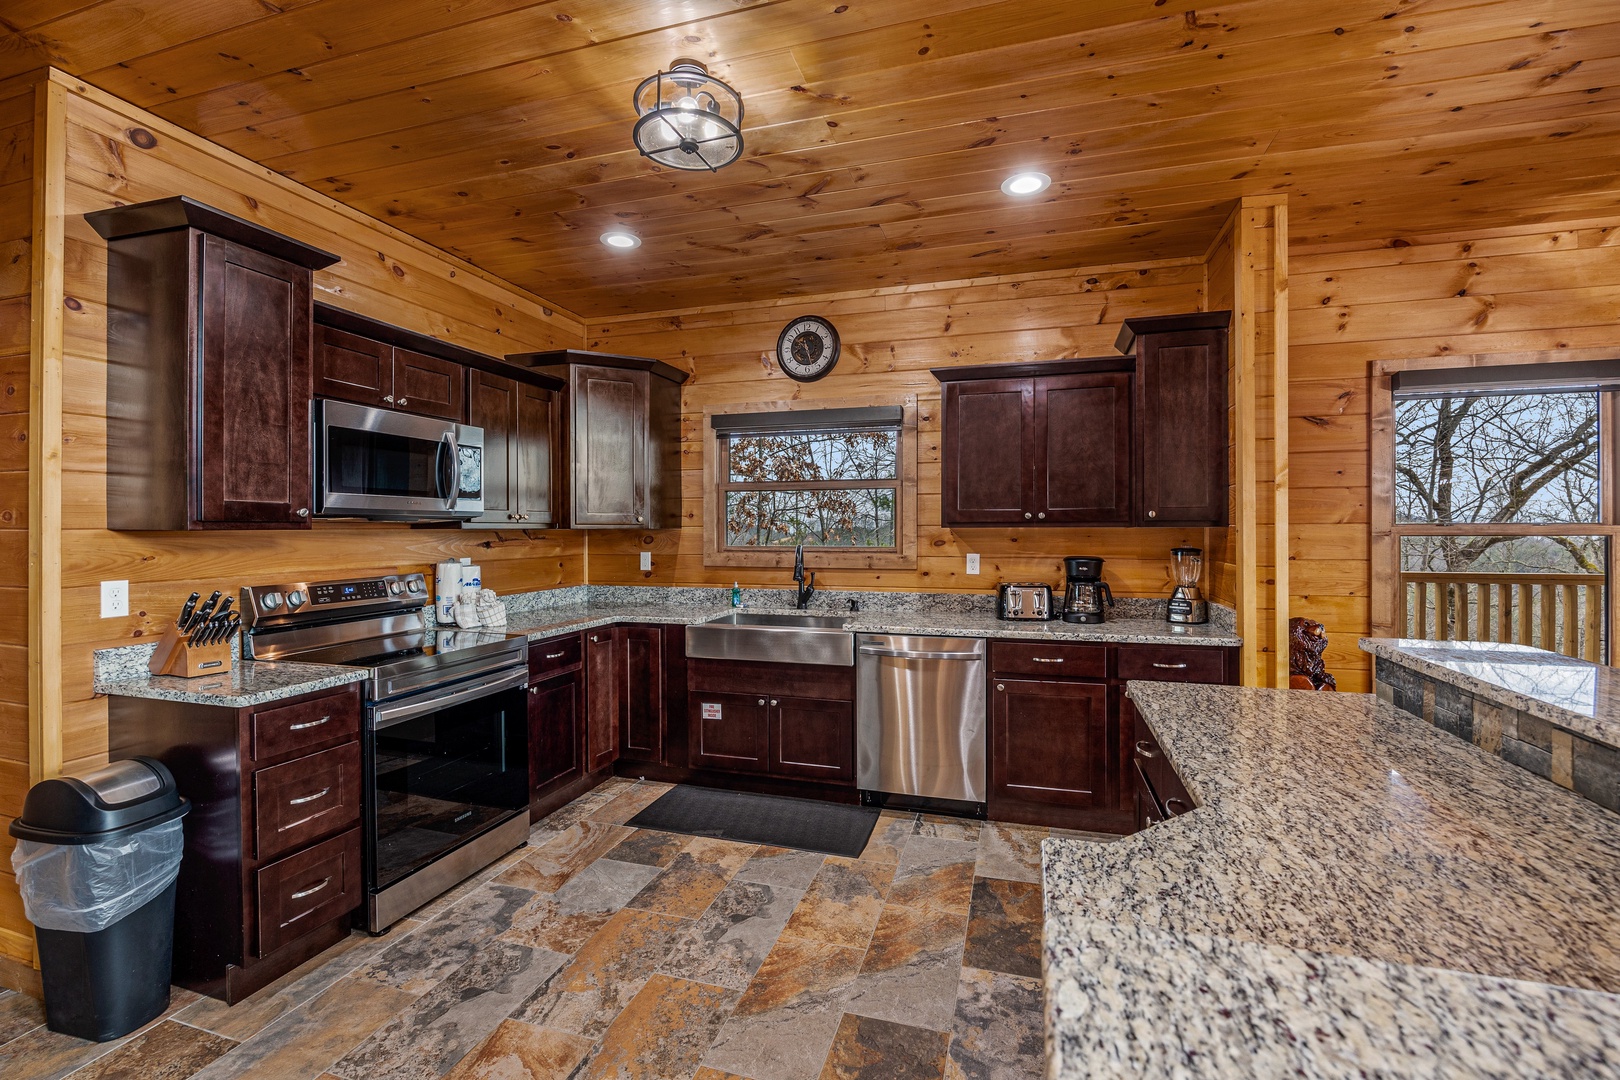 Kitchen appliances at Four Seasons Grand, a 5 bedroom cabin rental located in Pigeon Forge